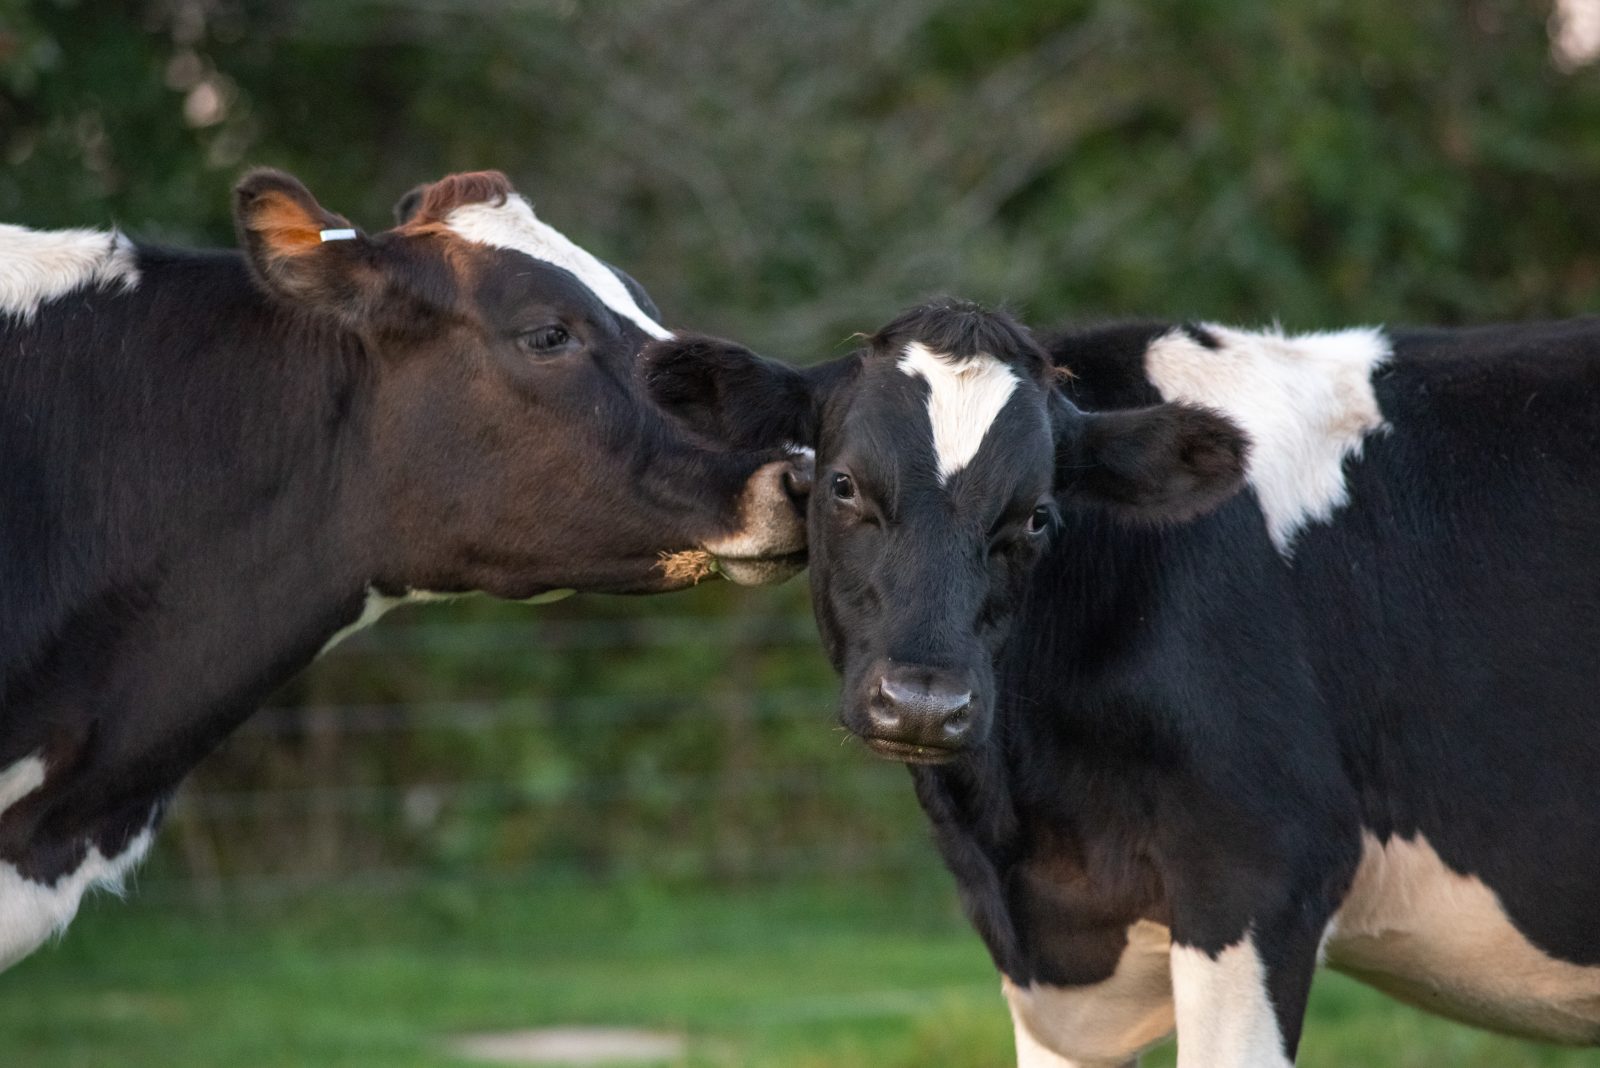 Snickers cow kisses Michael Morgan steer at Farm Sanctuary's New York shelter